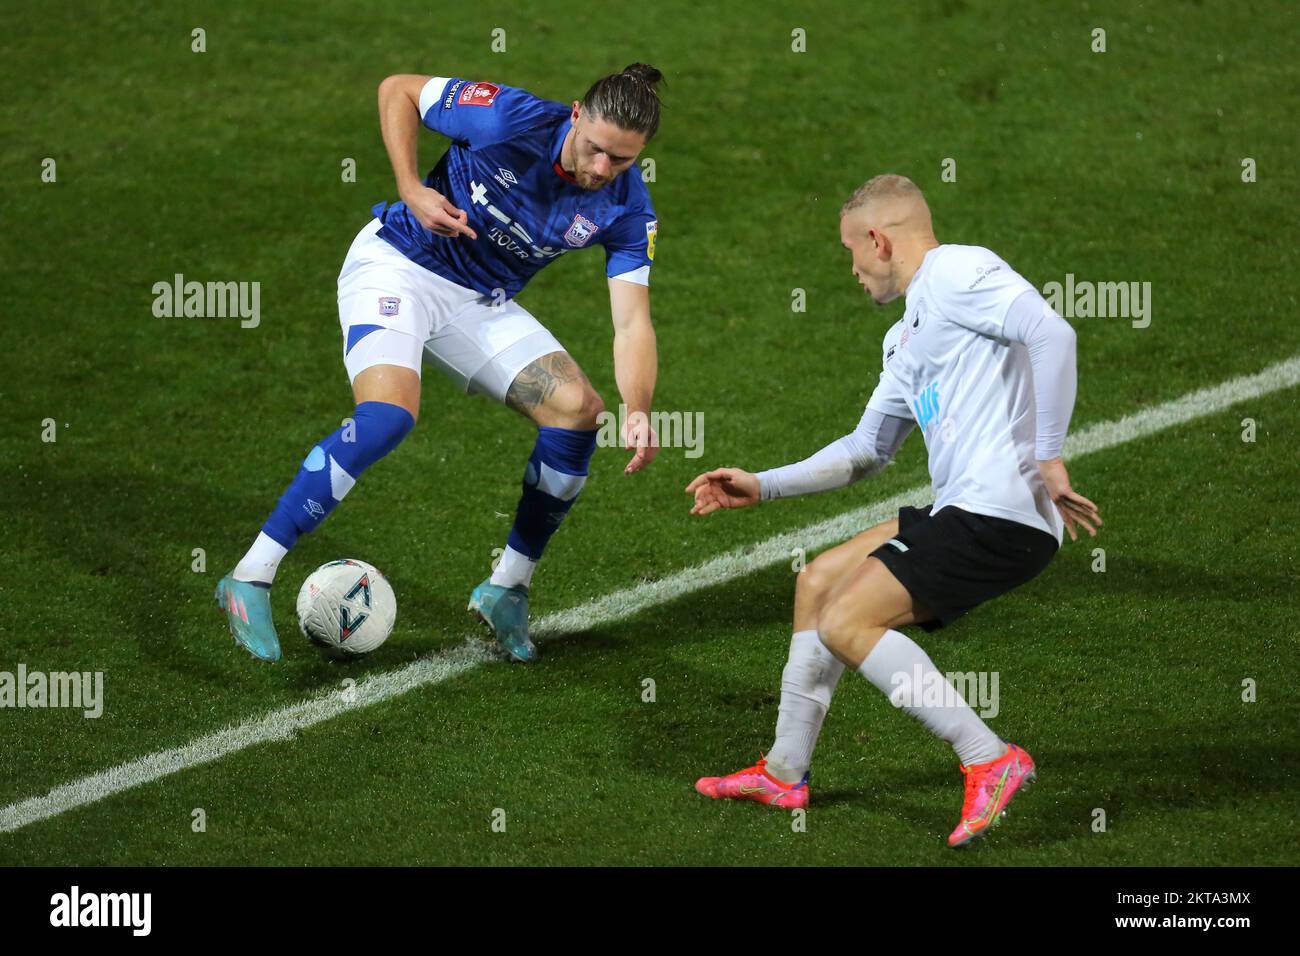 Wes Burns of Ipswich Town and Lindon Meikle of Buxton - Ipswich Town v Buxton, The Emirates FA Cup second round, Portman Road, Ipswich, UK - 27th November 2022  Editorial Use Only - DataCo restrictions apply Stock Photo